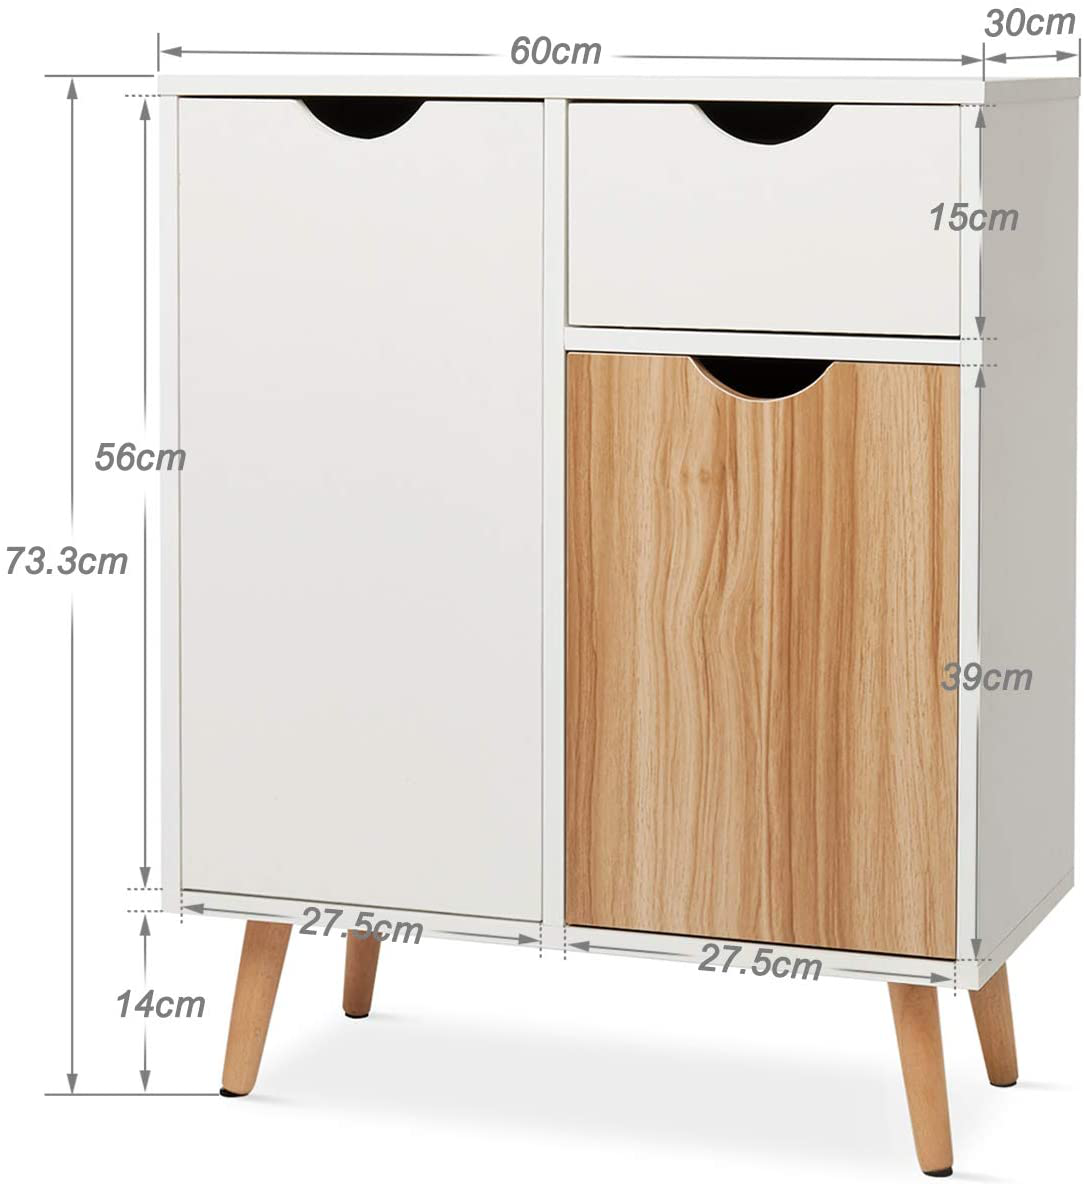 Lynton Sideboard Storage Cabinet, Cupboard with Drawers and 2 Doors 